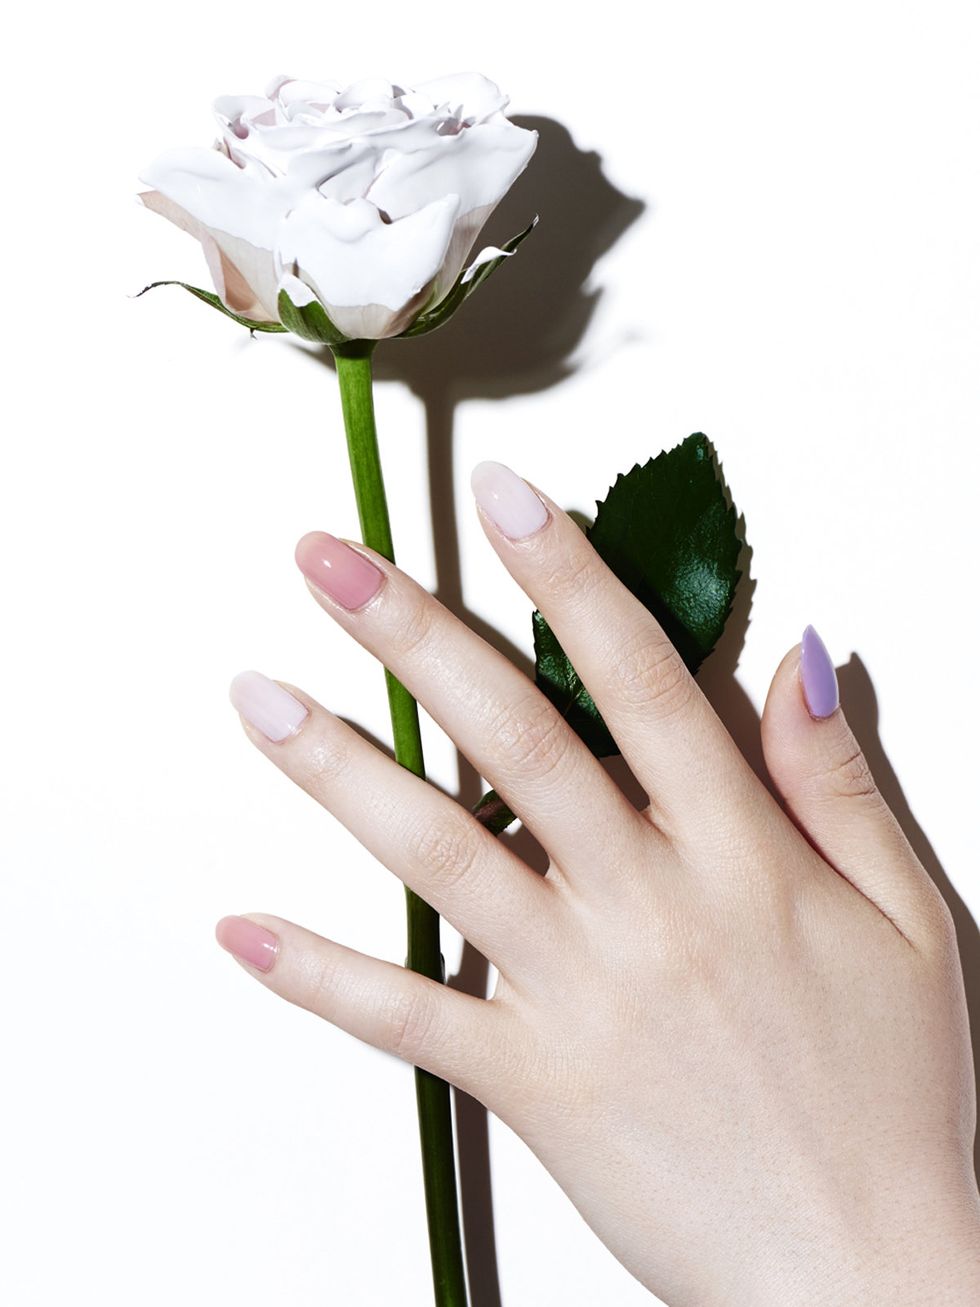 Finger, Green, Petal, Nail, Flower, Nail care, Flowering plant, Colorfulness, Manicure, Nail polish, 